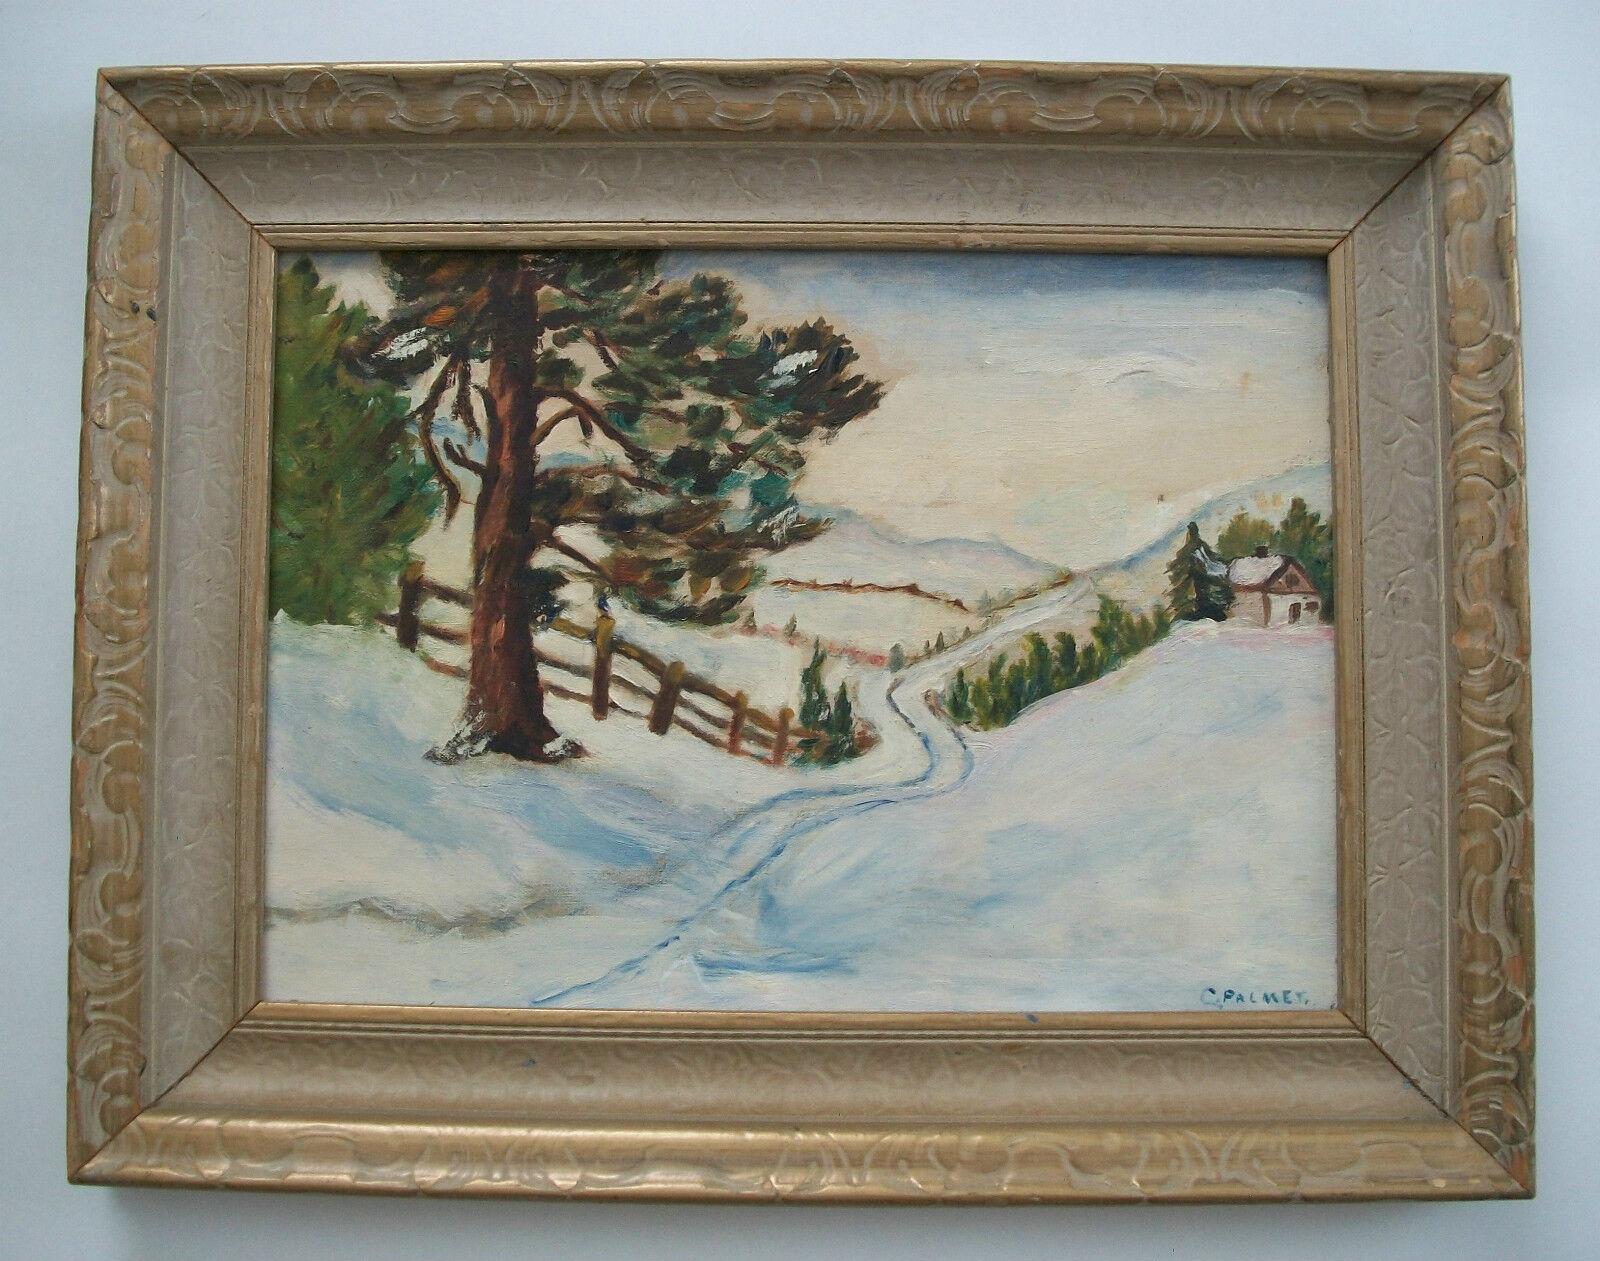 20th Century C PALMER - Impressionist Style Winter Landscape Painting - Canada - Early 20th C For Sale